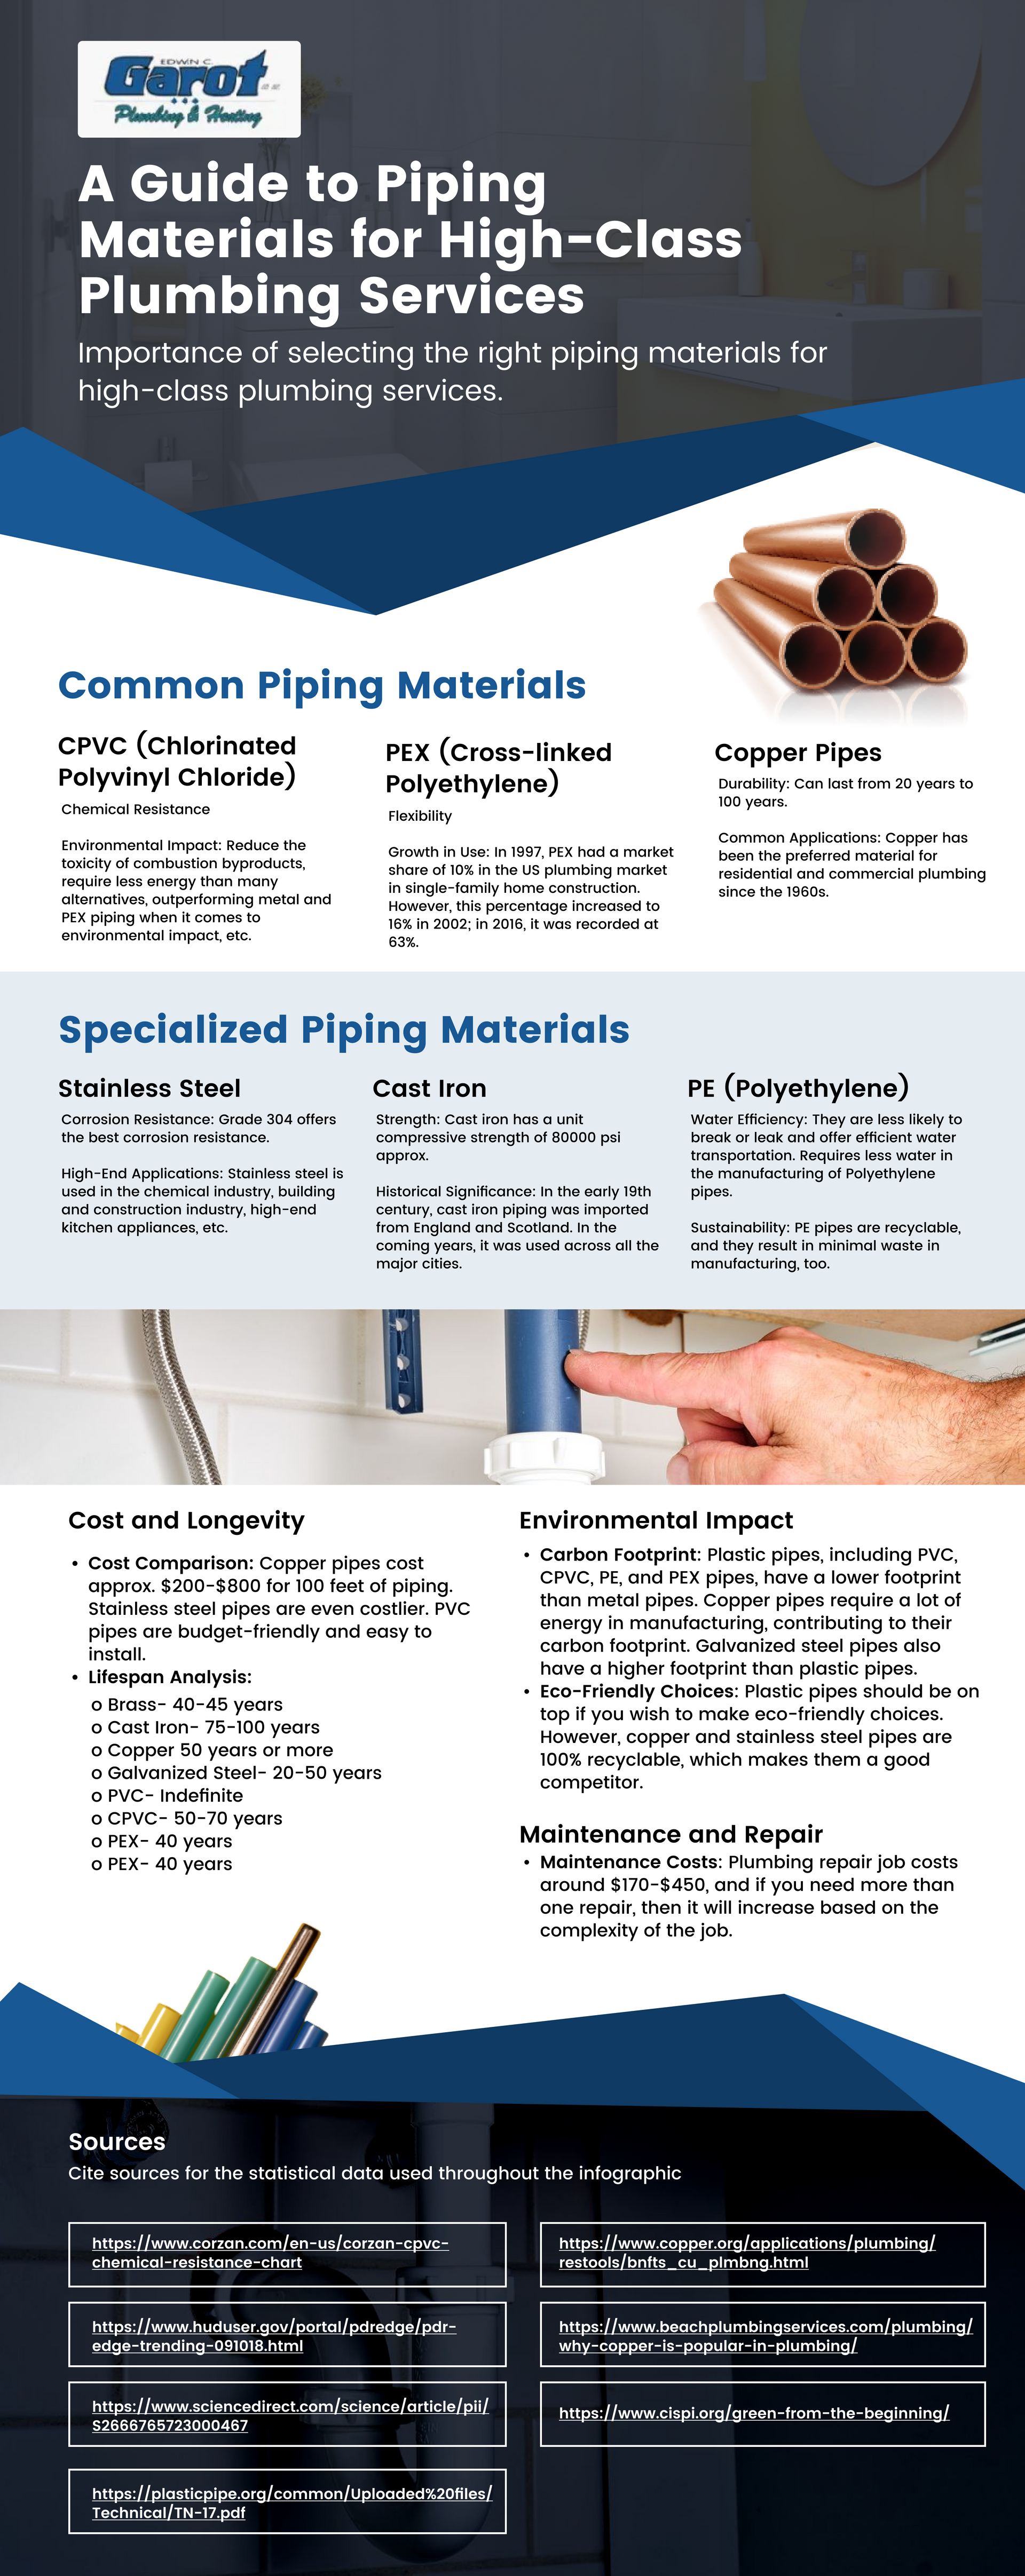 A Guide to Piping Materials for High-Class Plumbing Services Outlines